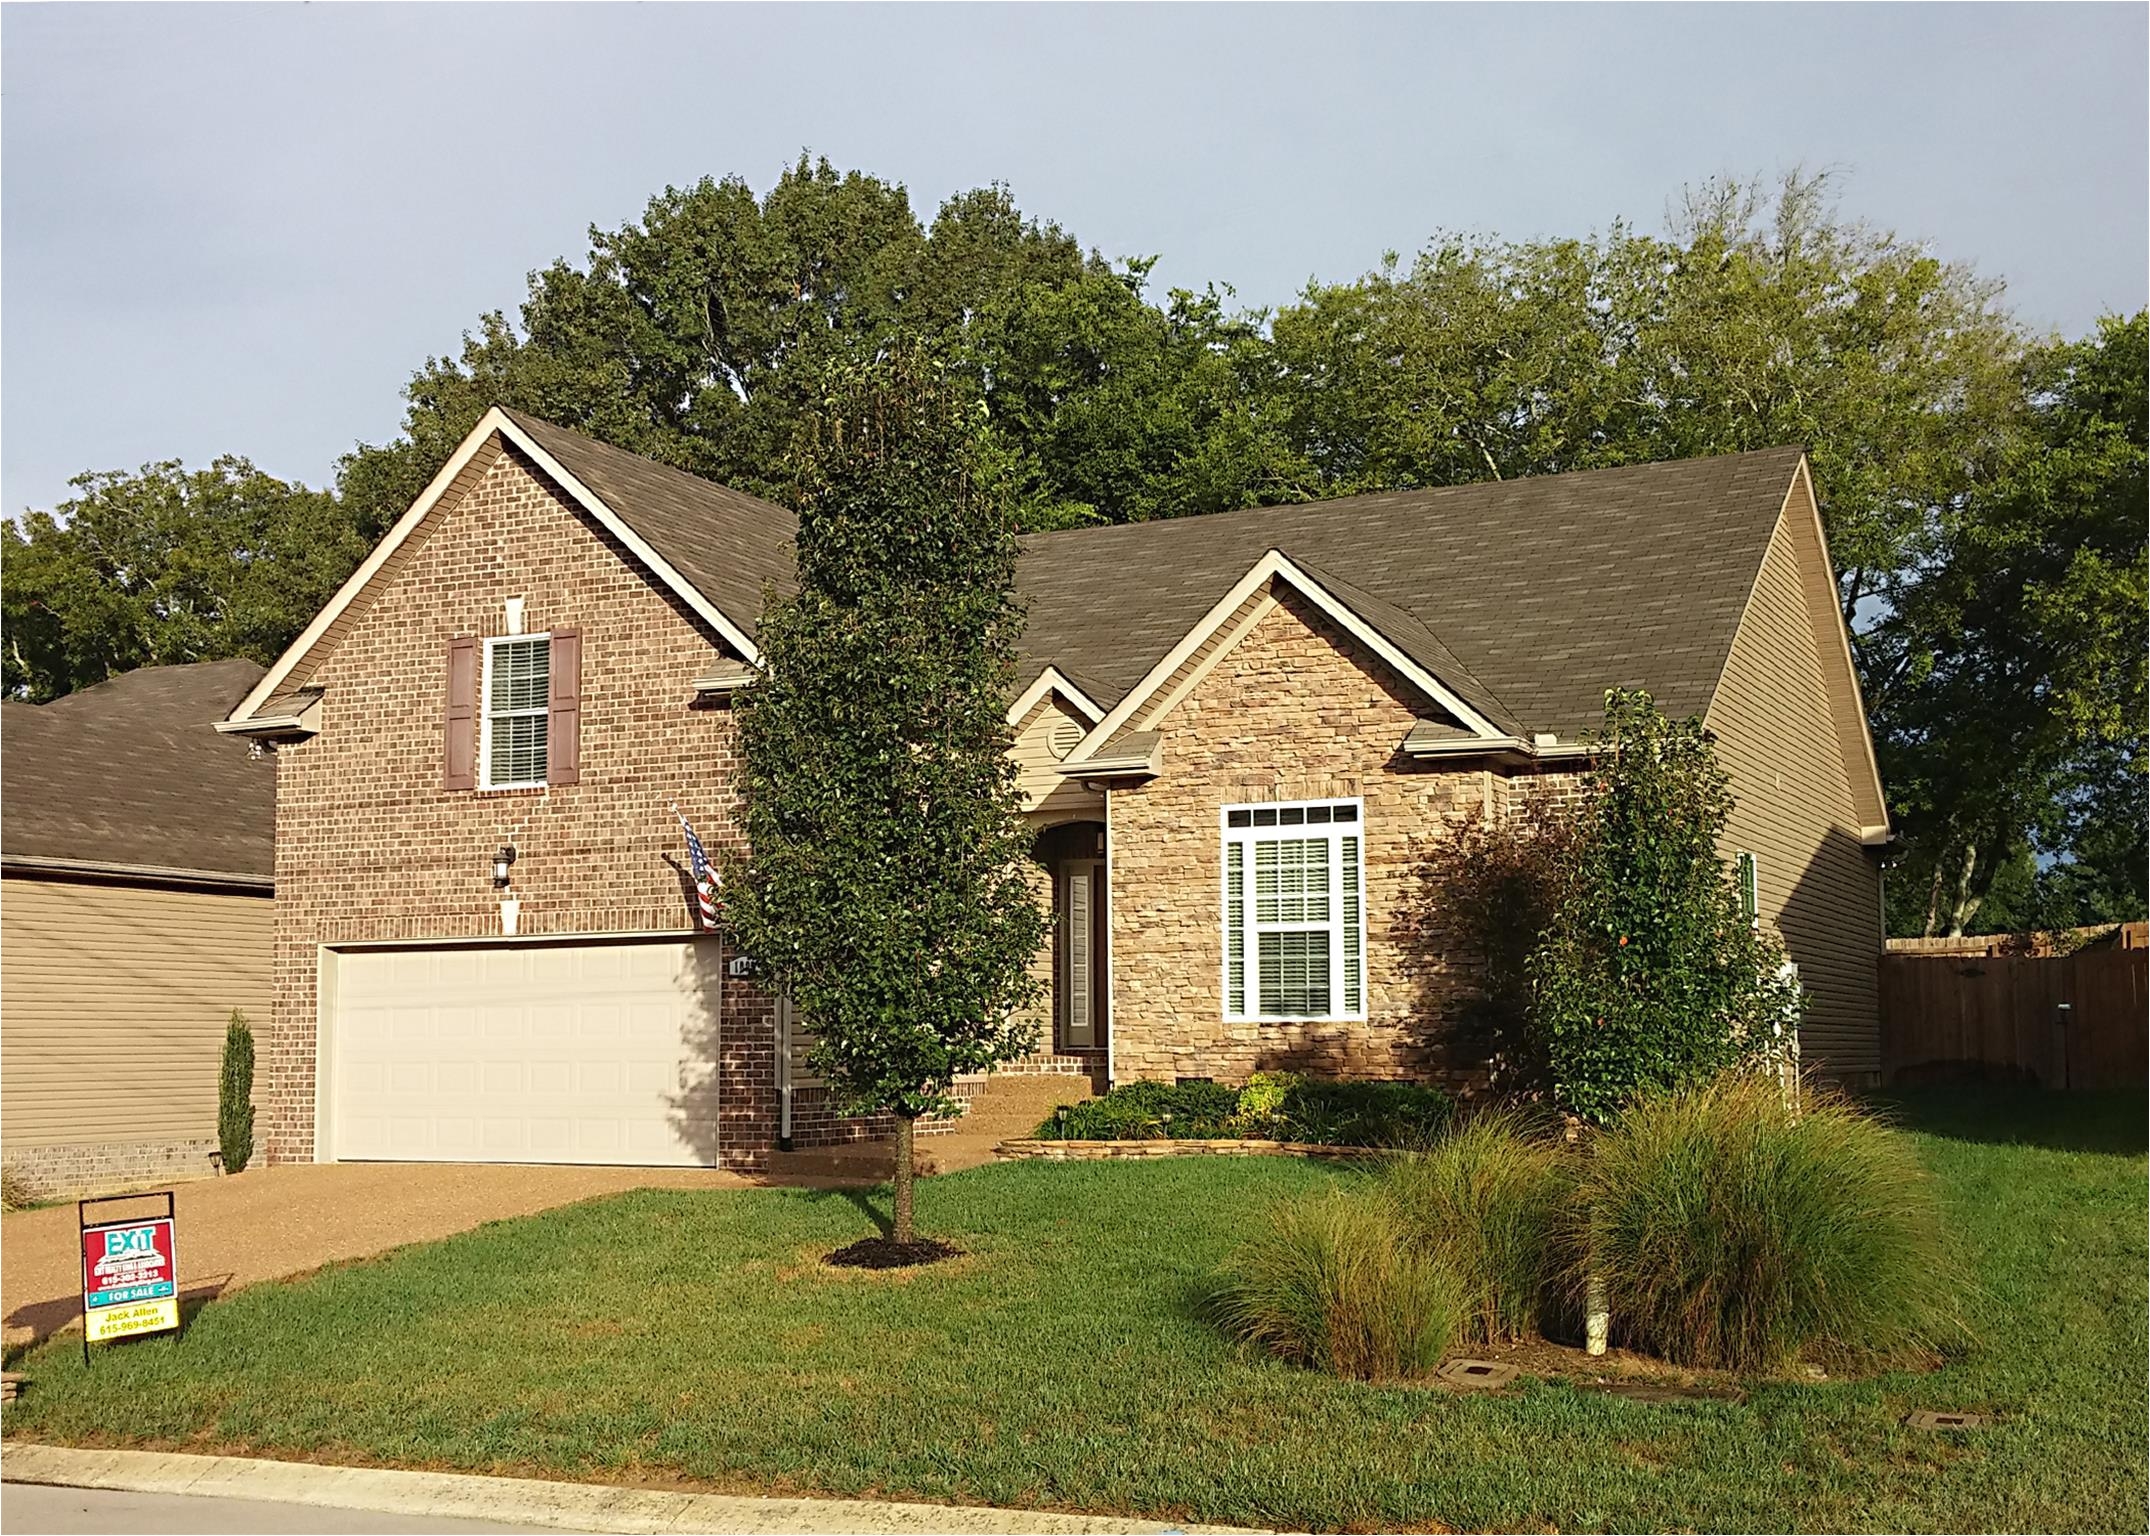 289900 1092 golf view way spring hill tn 37174 pending sale no showings